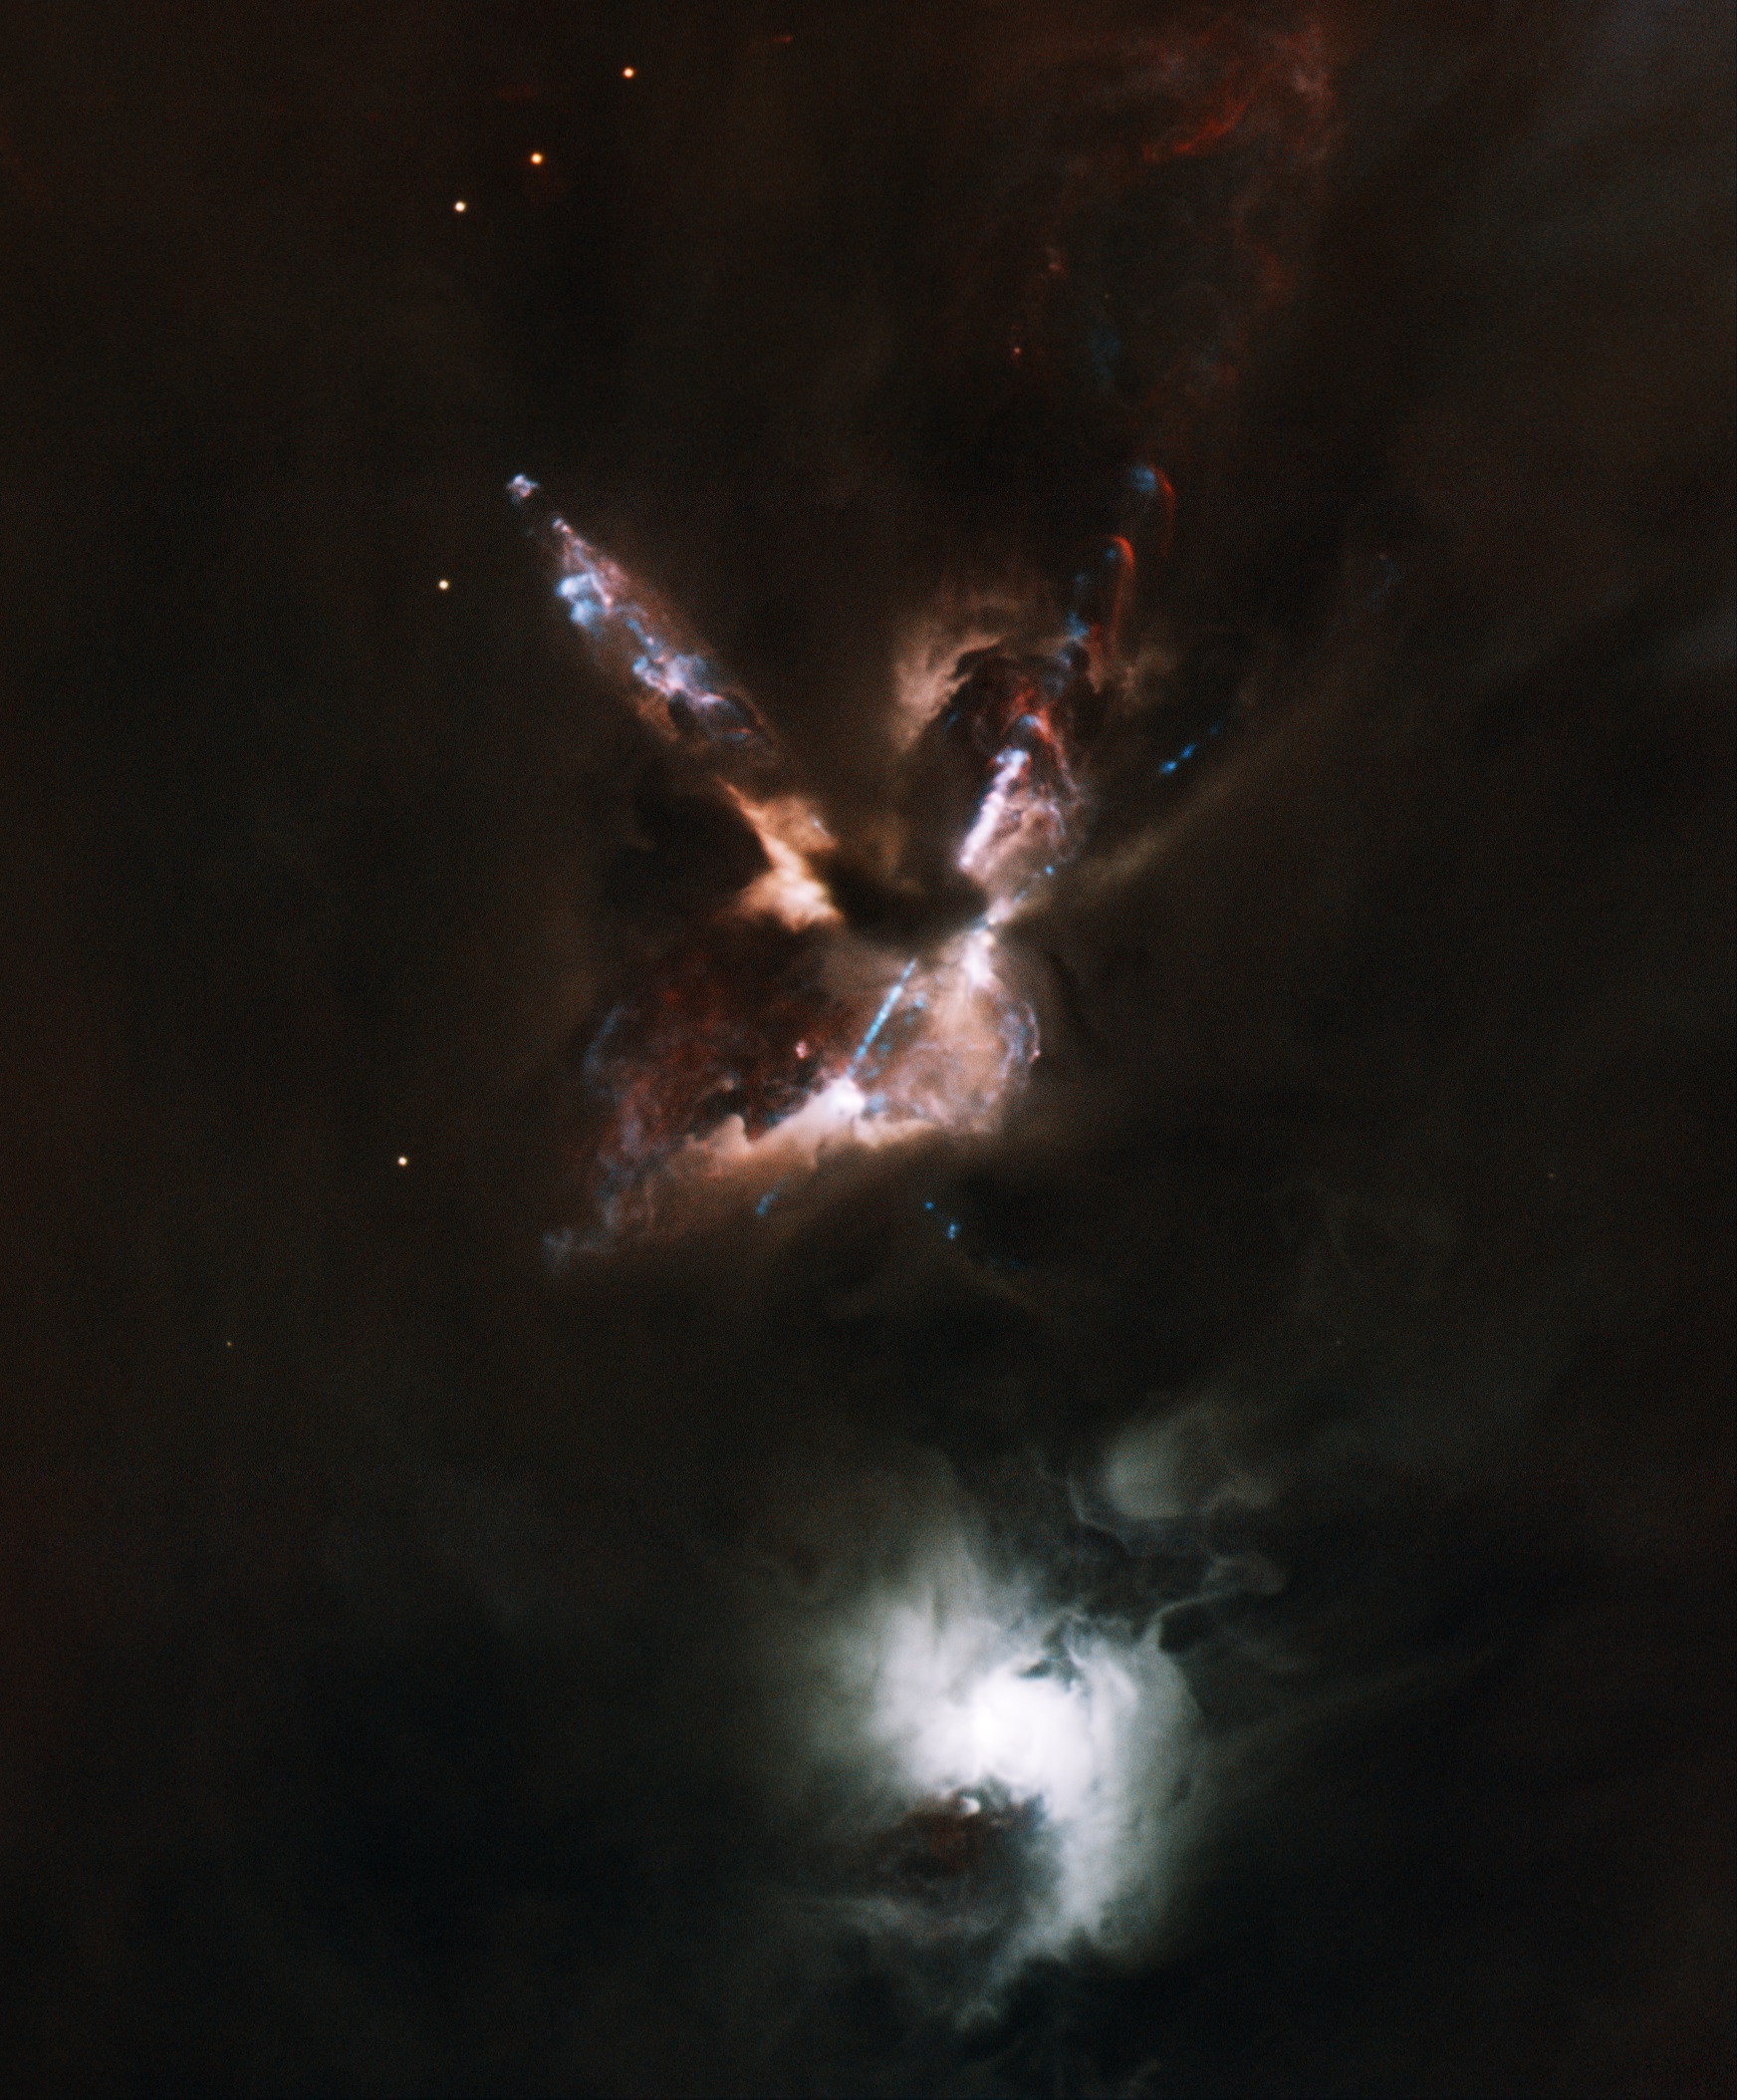 The HH 24 jet complex emanates from a dense cloud core that hosts a small multiple protostellar system known as SSV63. The nebulous star to the south is the visible T Tauri star SSV59. Color image based on the following filters with composite image color assignments in parenthesis: g (blue), r (cyan), I (orange), hydrogen-alpha (red), sulfur II (blue)) images obtained with GMOS on Gemini North in 0.5 arcsecond seeing, and NIRI. Field of view is 4.2x5.1 arcminutes, orientation: north up, east left. Image produced by Travis Rector.